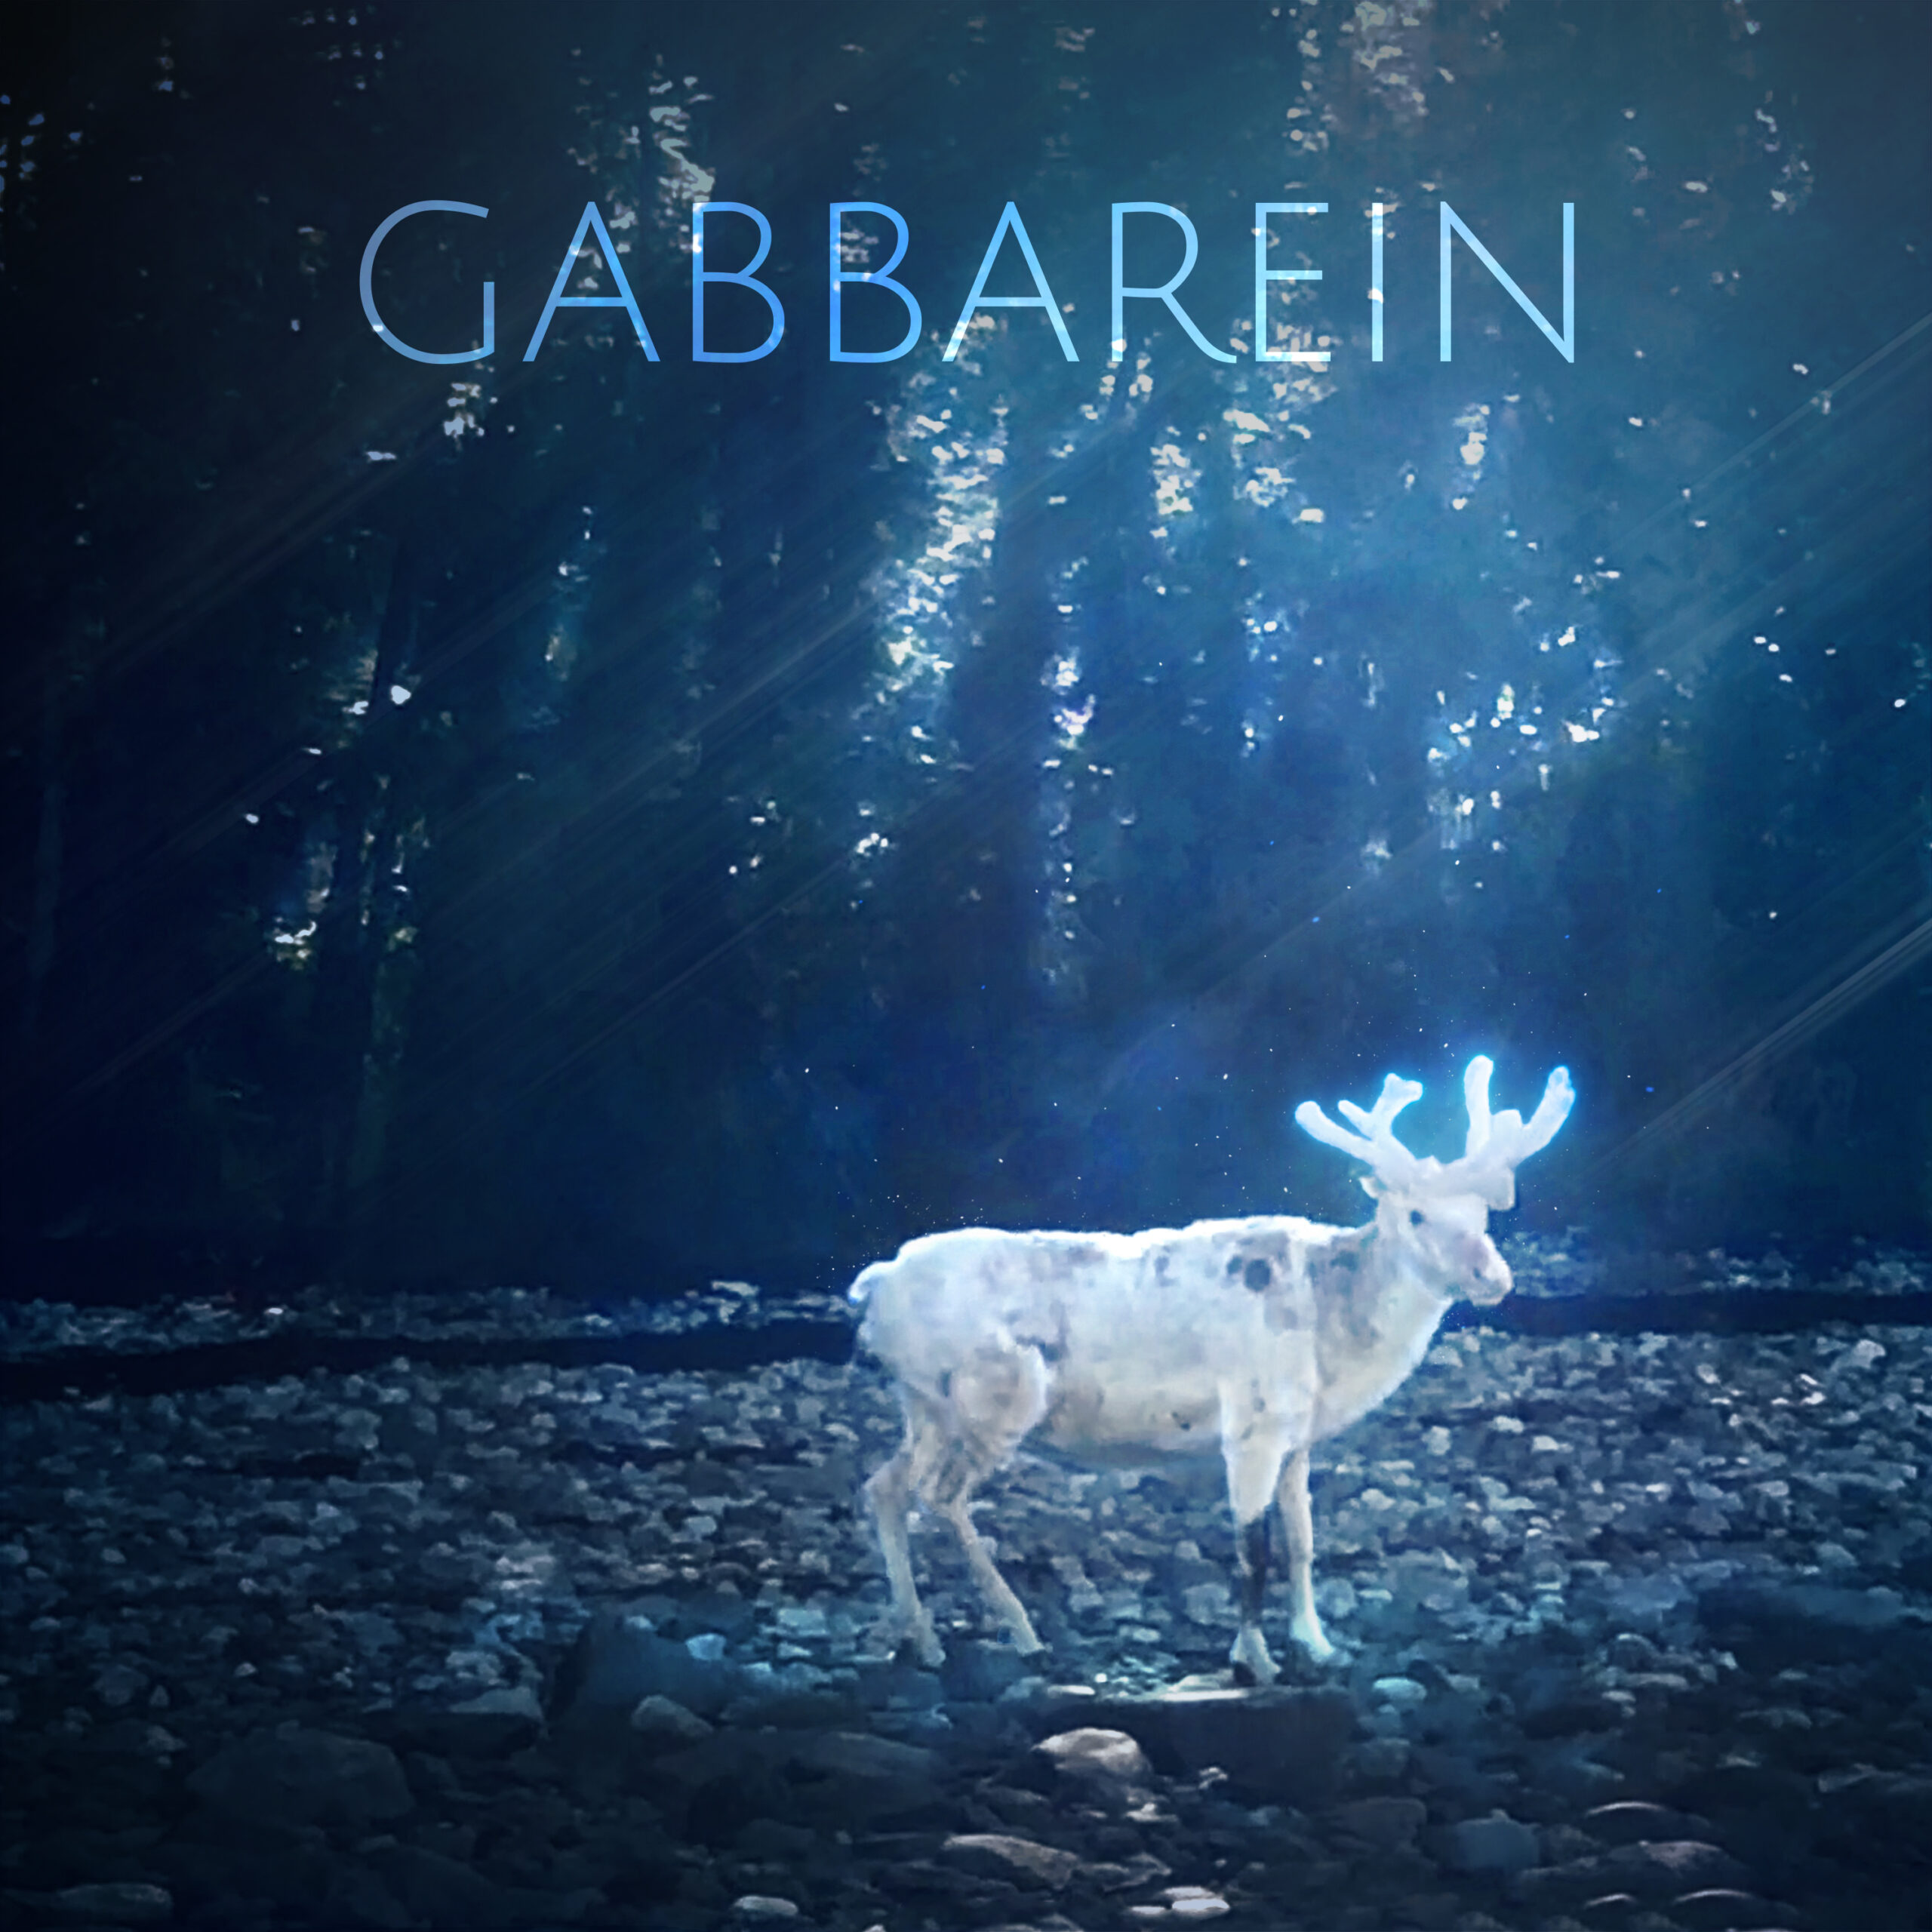 Norway’s Gabbarein shares debut single / video “Ra Rising Sun” and announces debut LP